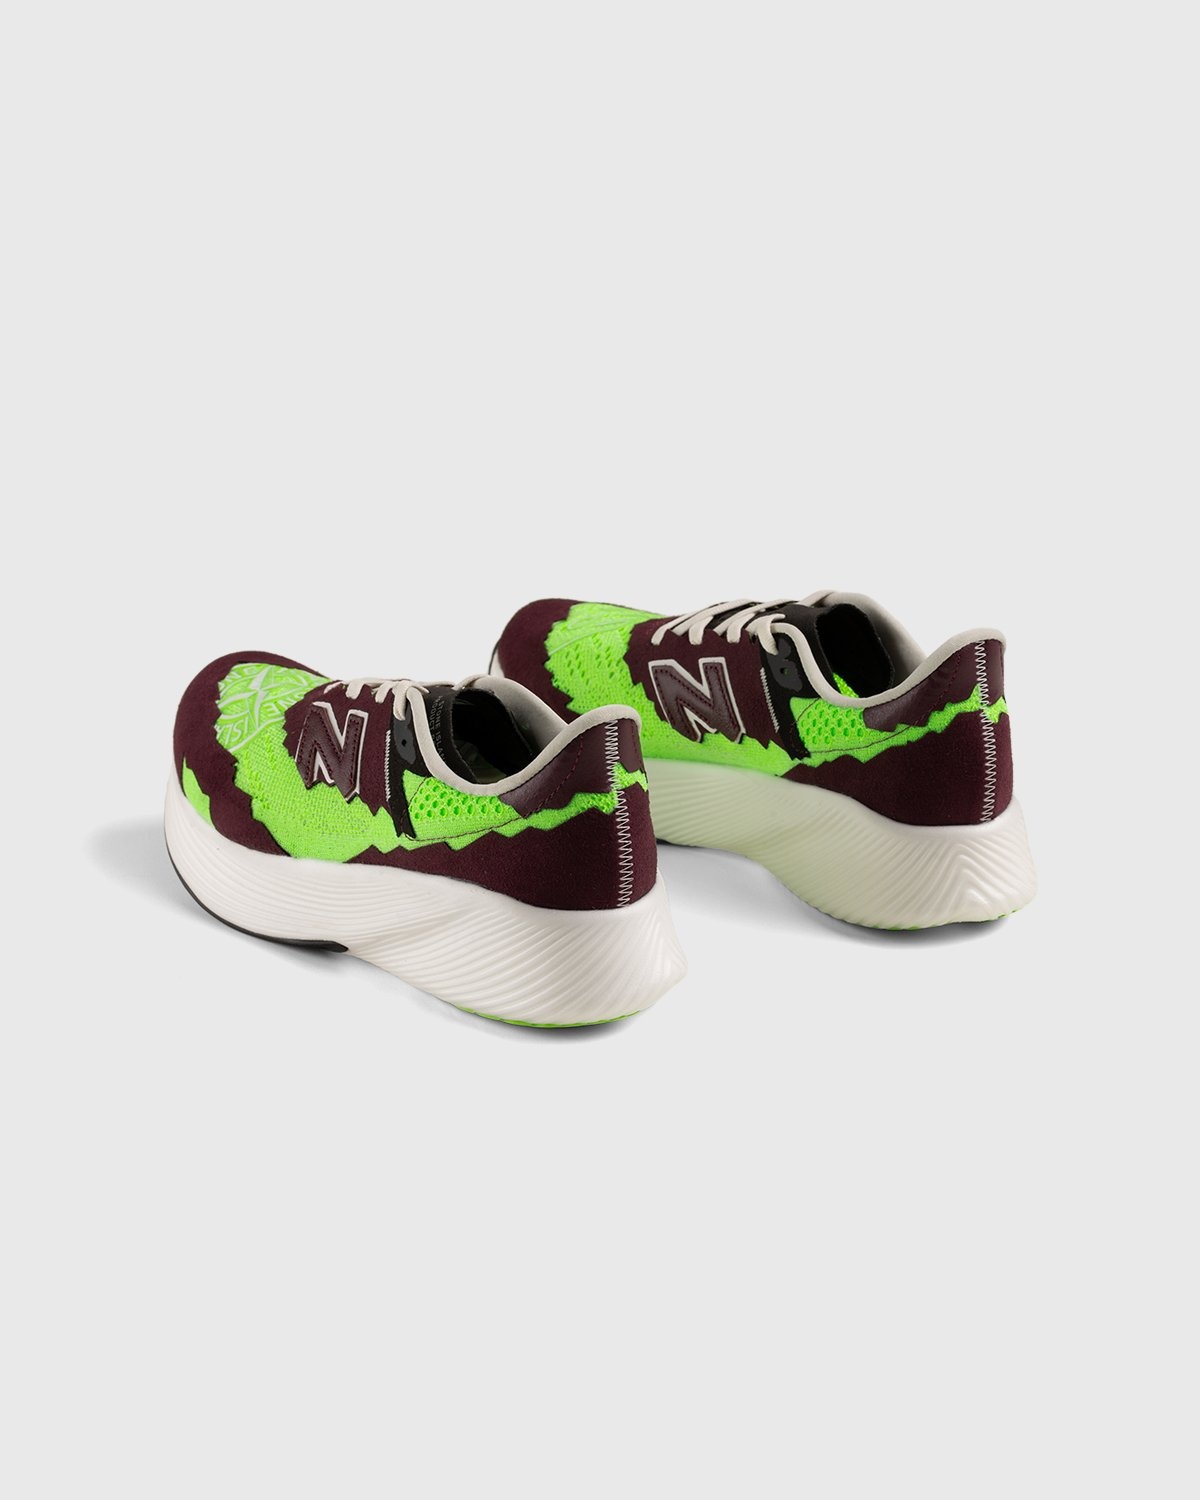 New Balance x Stone Island – FuelCell RC Elite v2 Energy Lime - Sneakers - Green - Image 3